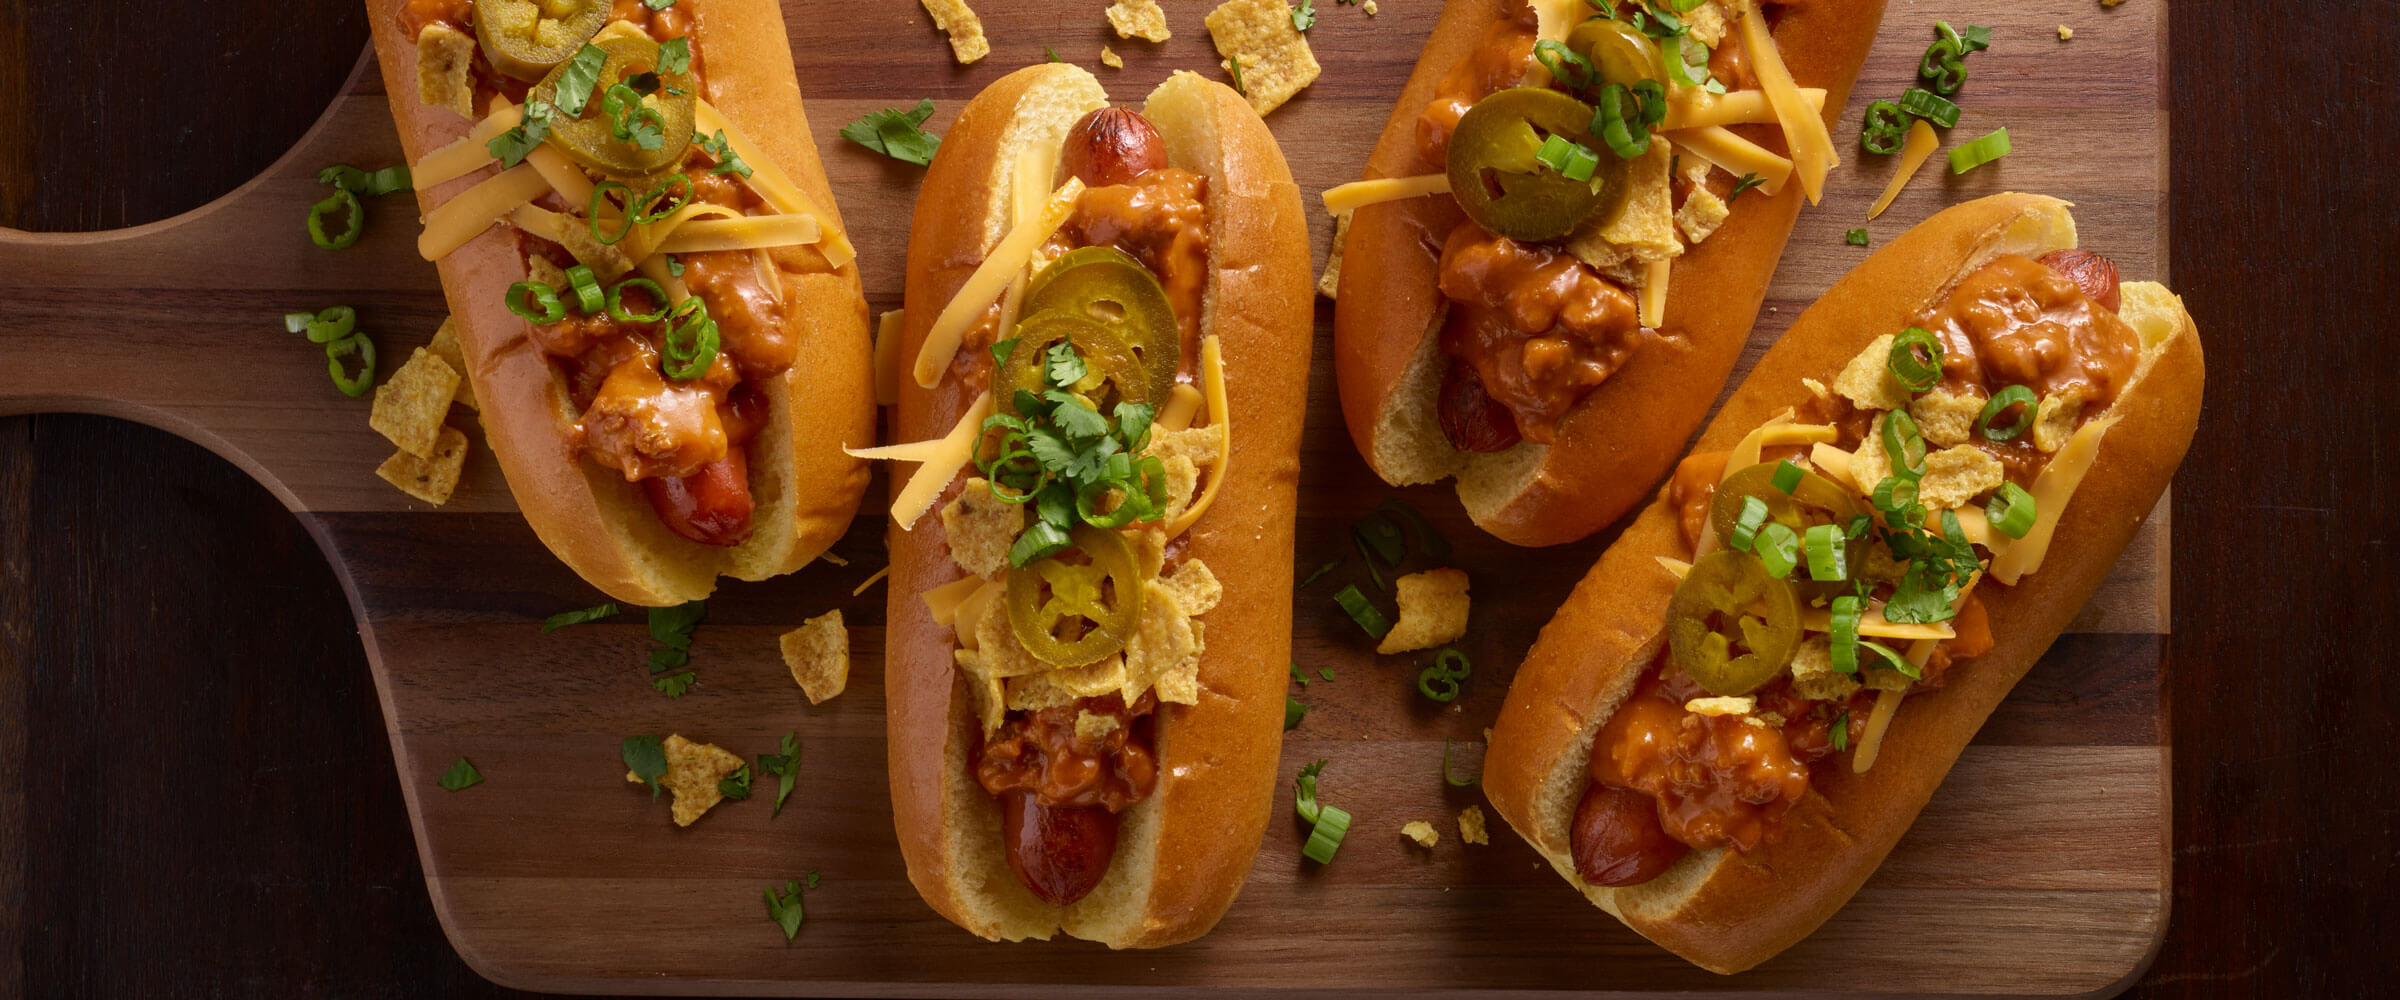 Cheese Chili Corn Chip Pie Chili Dogs topped with jalapenos, chips, and cilantro on wood board